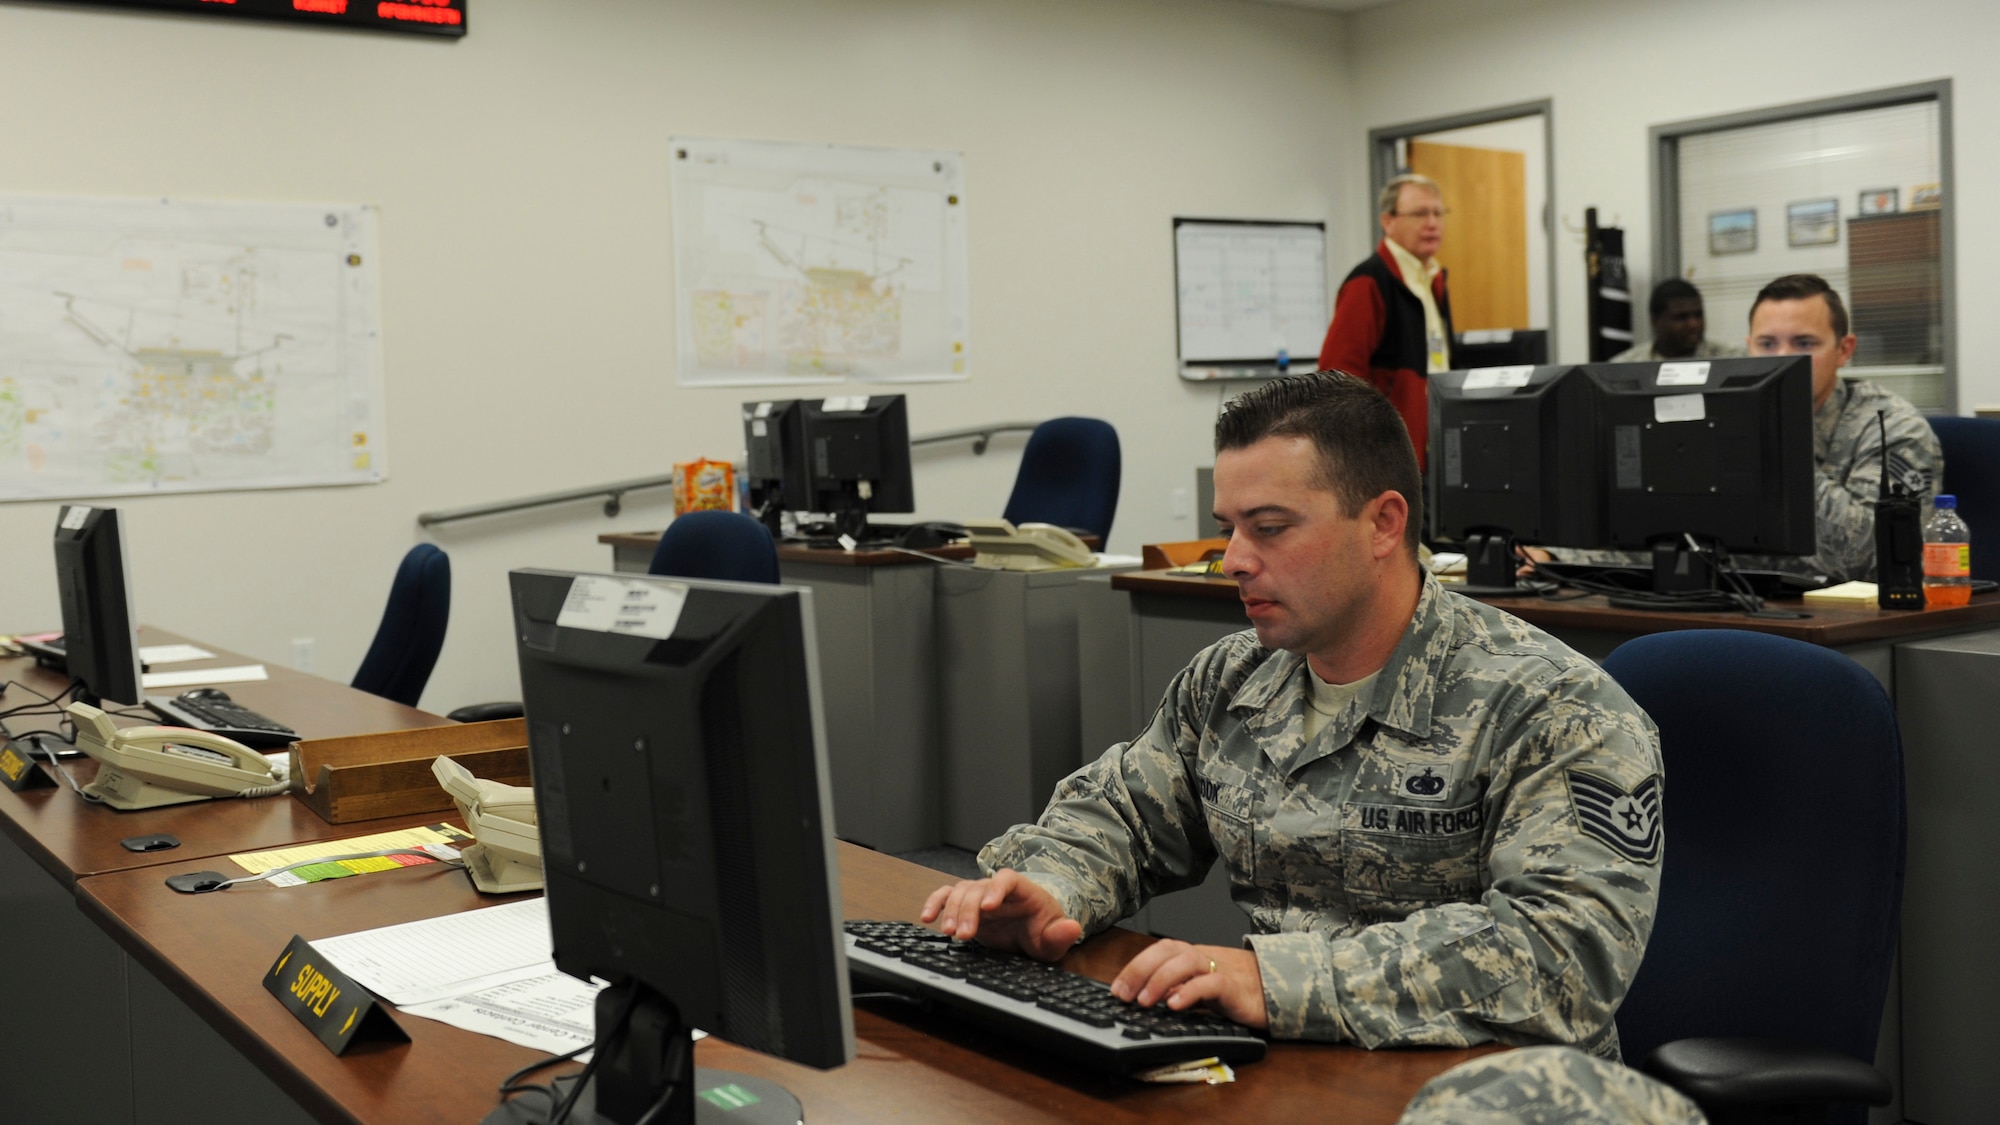 U.S. Air Force Tech. Sgt. Stephen Cook, the NCO in charge of equipment with the 509th Logistics Readiness Squadron (LRS), oversees the supply section of the deployment control center during Exercise Global Thunder 17 (GT17) at Whiteman Air Force Base, Mo., Oct. 25, 2016. The deployment control center is the centralized location tracking on the 509th LRS process during the exercise. Exercises like GT17 involve extensive planning and coordination to proide unique training opportunities for assigned units and forces. (U.S. Air Force Senior Airman Danielle Quilla)